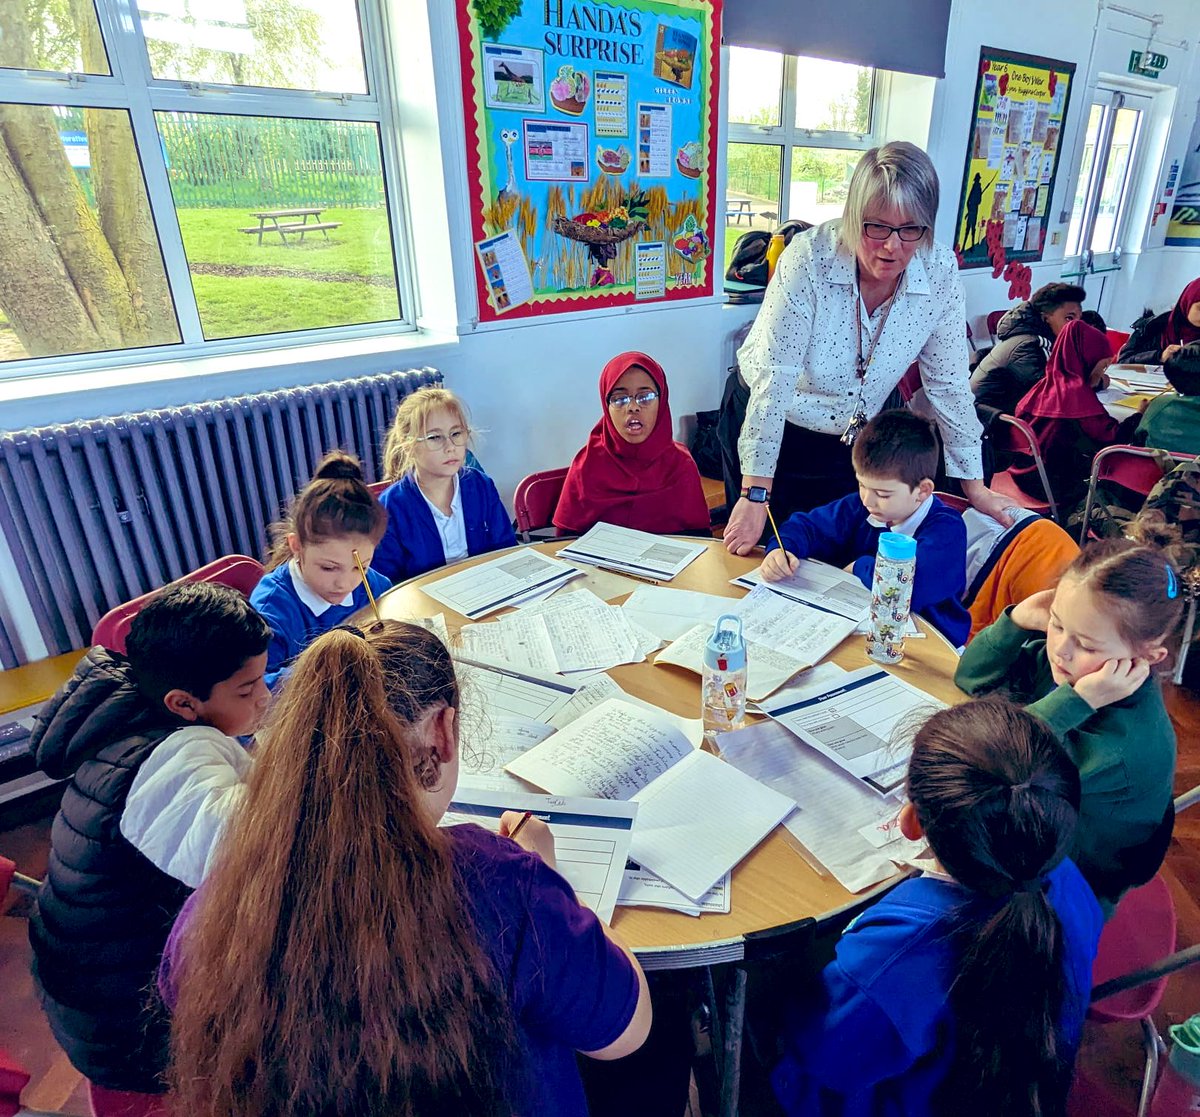 All 6 Midlands @AETAcademies schools came together today for our young authors project led by the wonderful @LFP_MissEvans & @MissThompsonAHT & joined by published author @MariaMotunrayo! @Anglesey_AET @beacon_aet @fourdwellingspa @lea_forest_aet @MontyAcademy @PercyShurmerAET